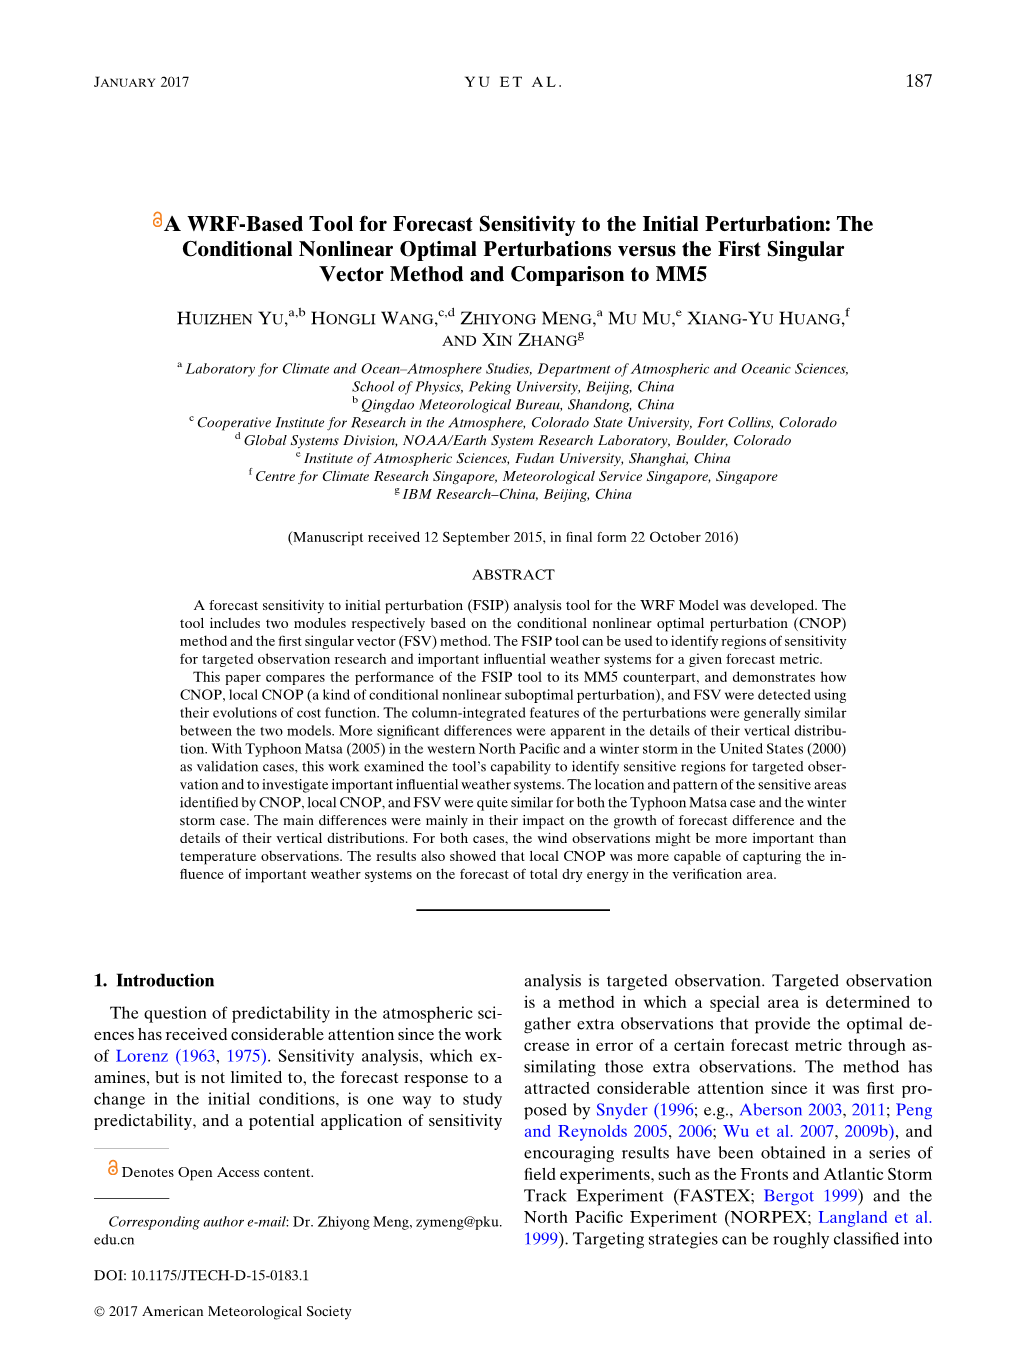 A WRF-Based Tool for Forecast Sensitivity to the Initial Perturbation: the Conditional Nonlinear Optimal Perturbations Versus Th